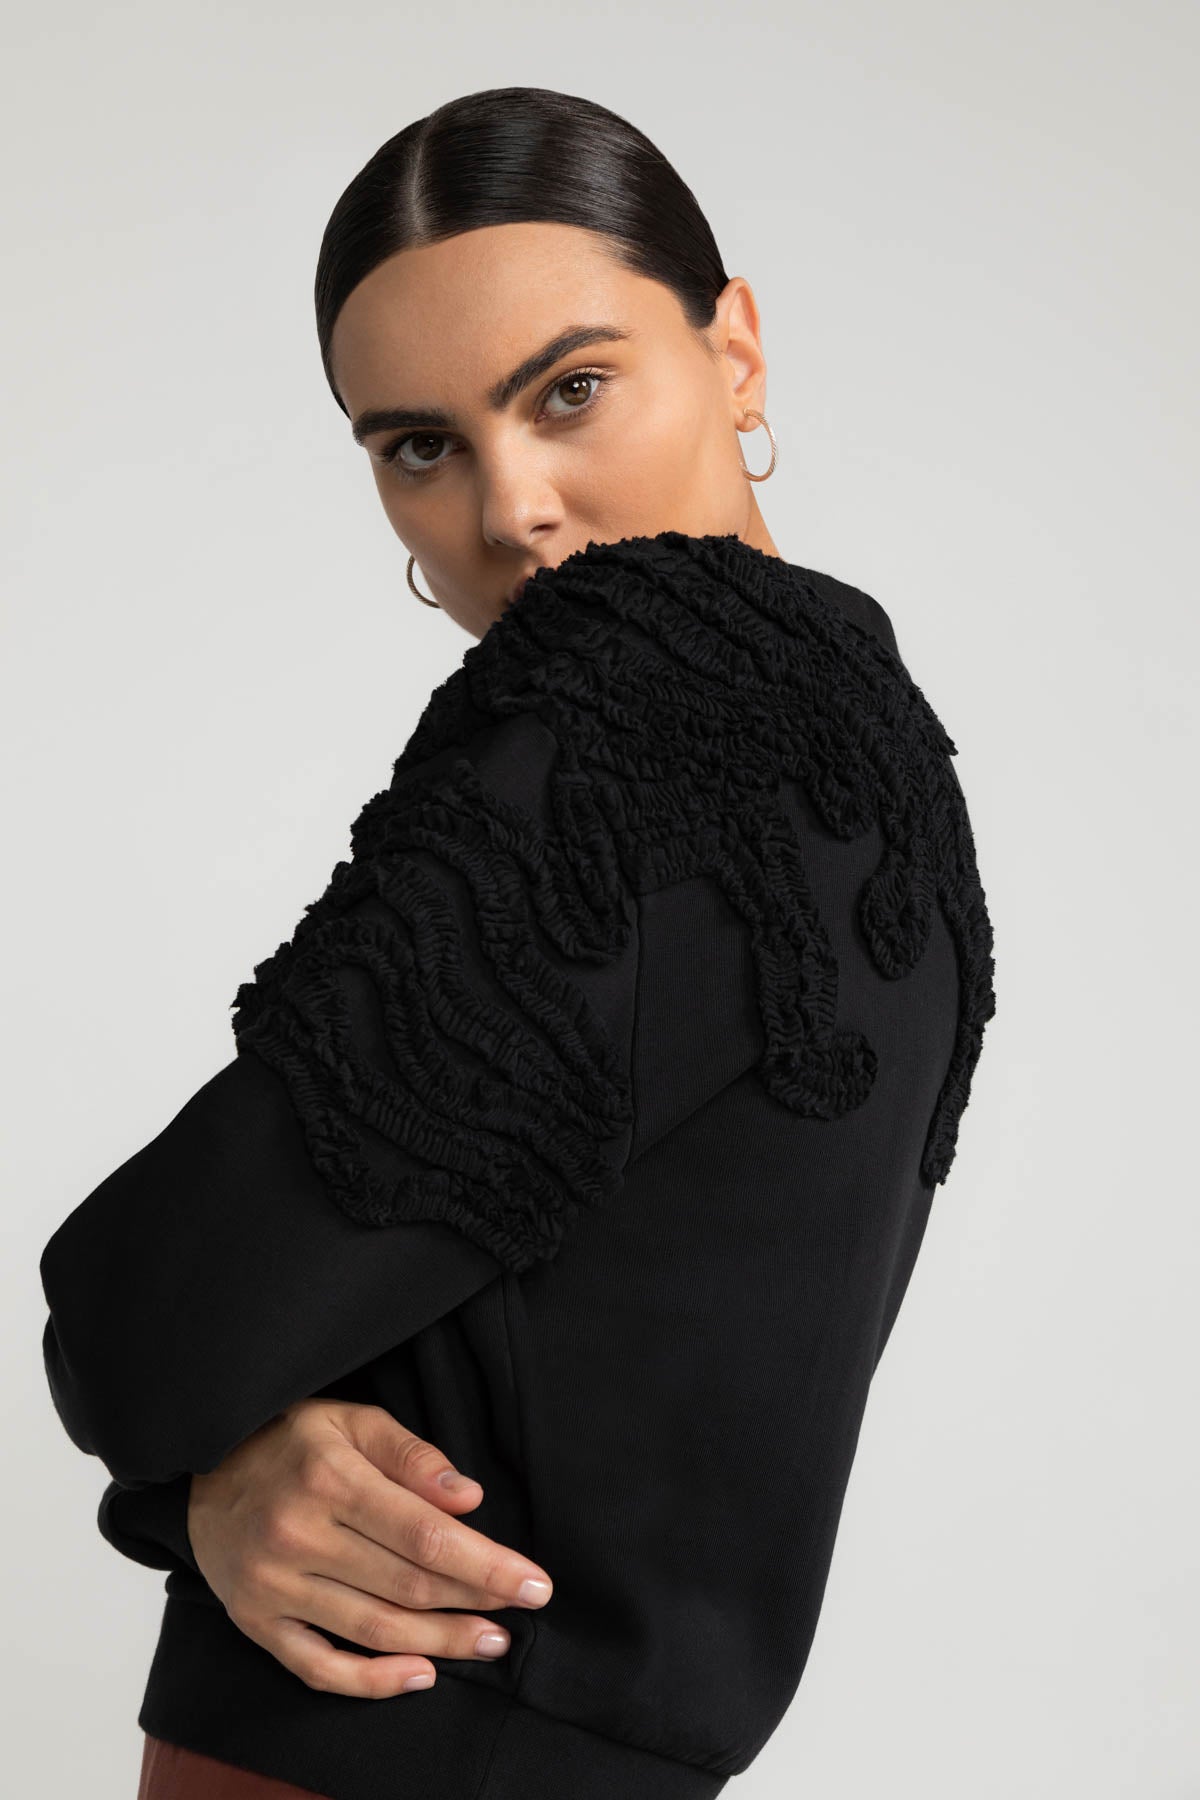 Sweater THIMMEA in black by LOVJOI made of organic cotton